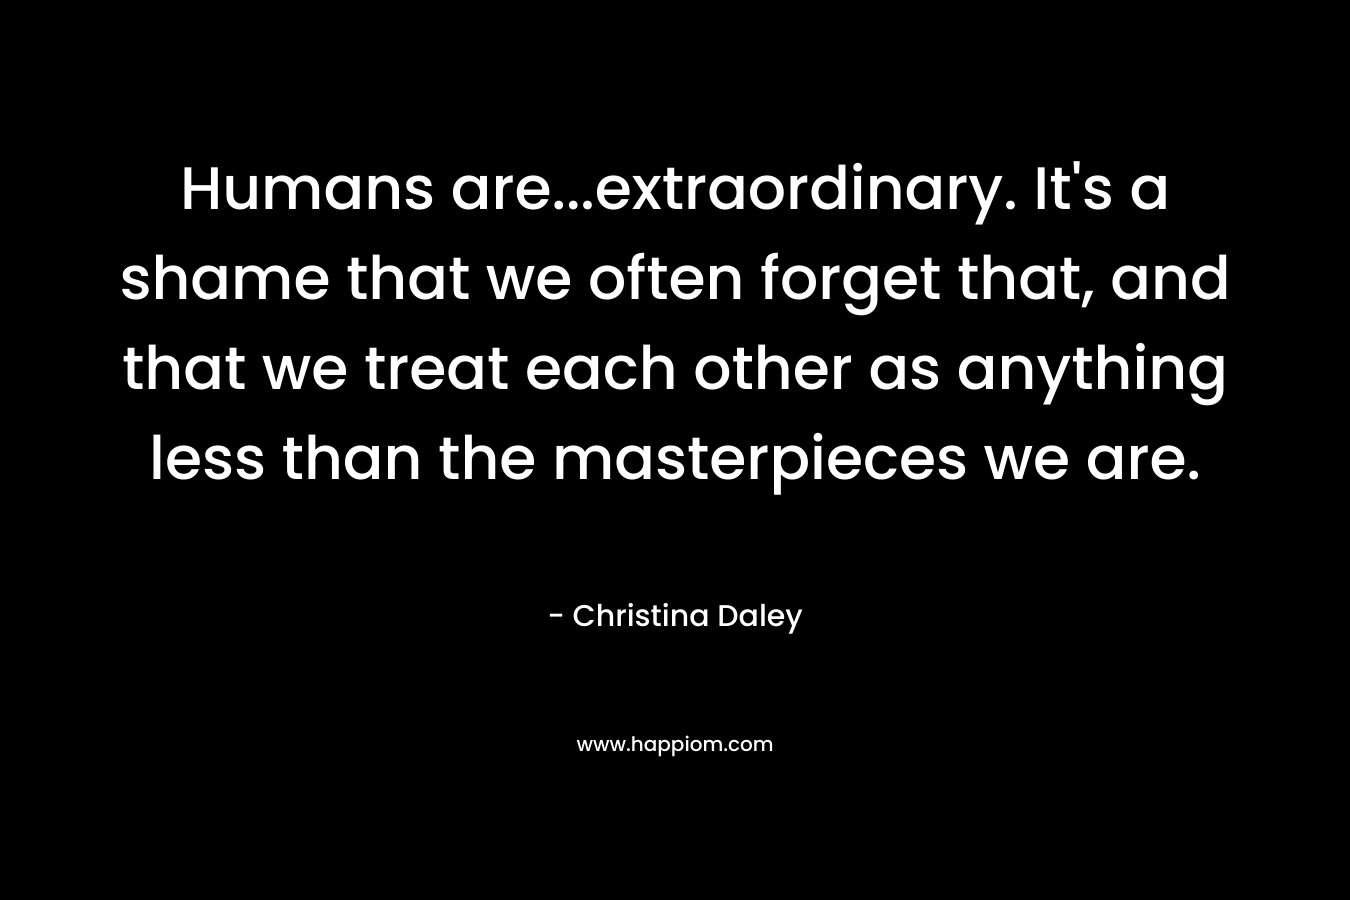 Humans are...extraordinary. It's a shame that we often forget that, and that we treat each other as anything less than the masterpieces we are.